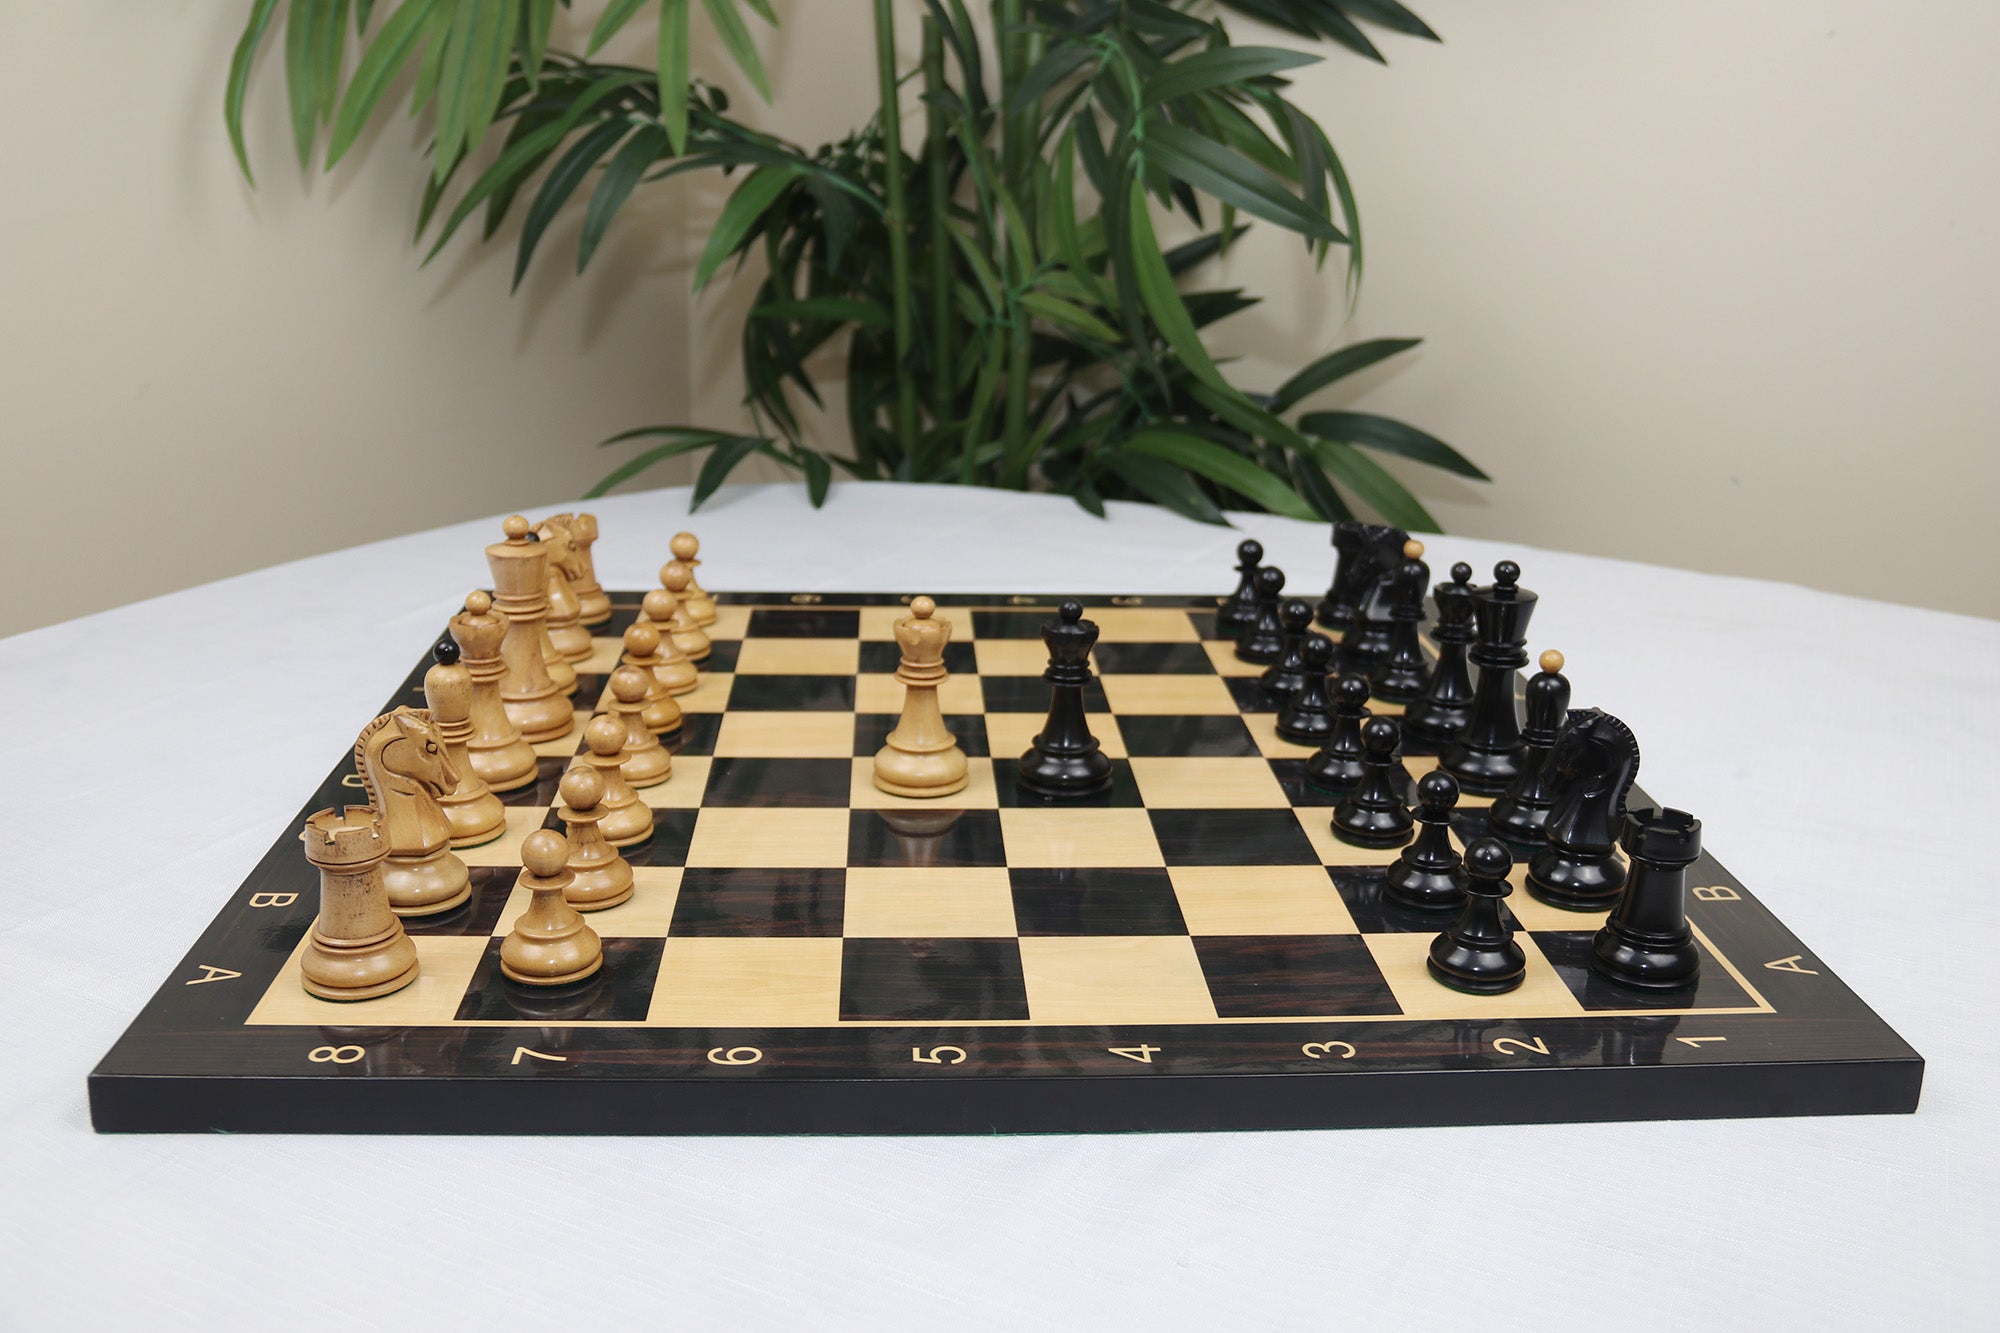 18 Chess Board With Chess Pieces Yugoslavia Series -  UK